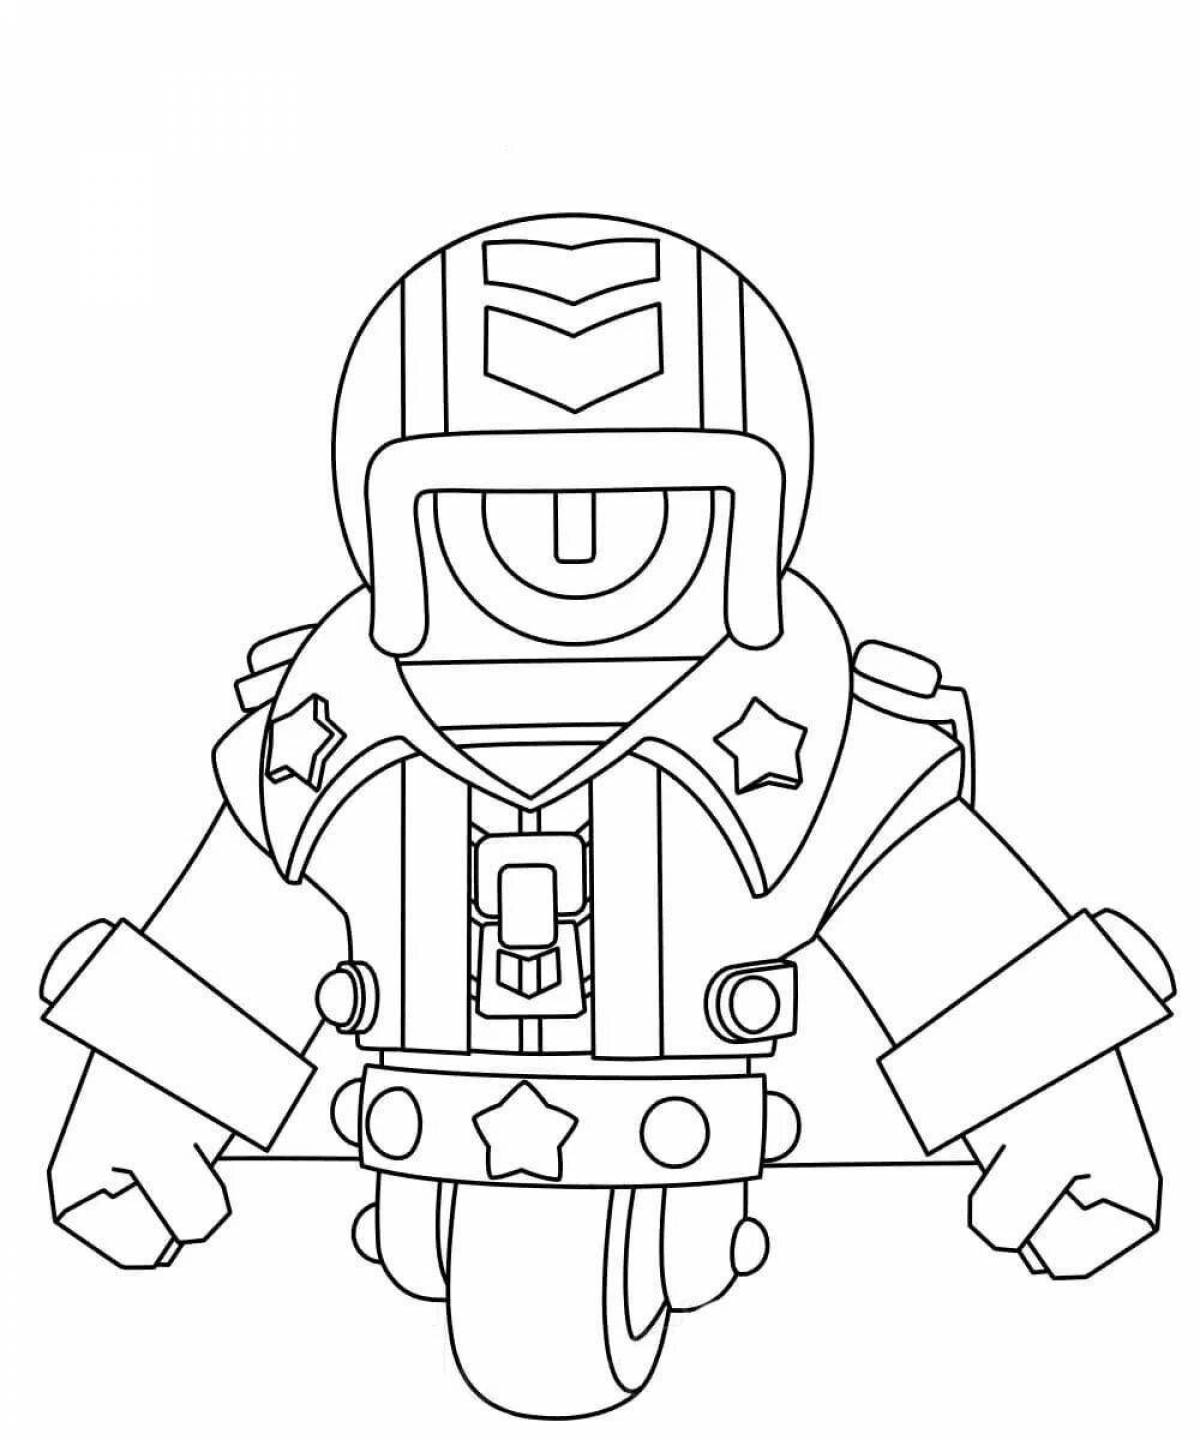 Brawl stars majestic coloring pages